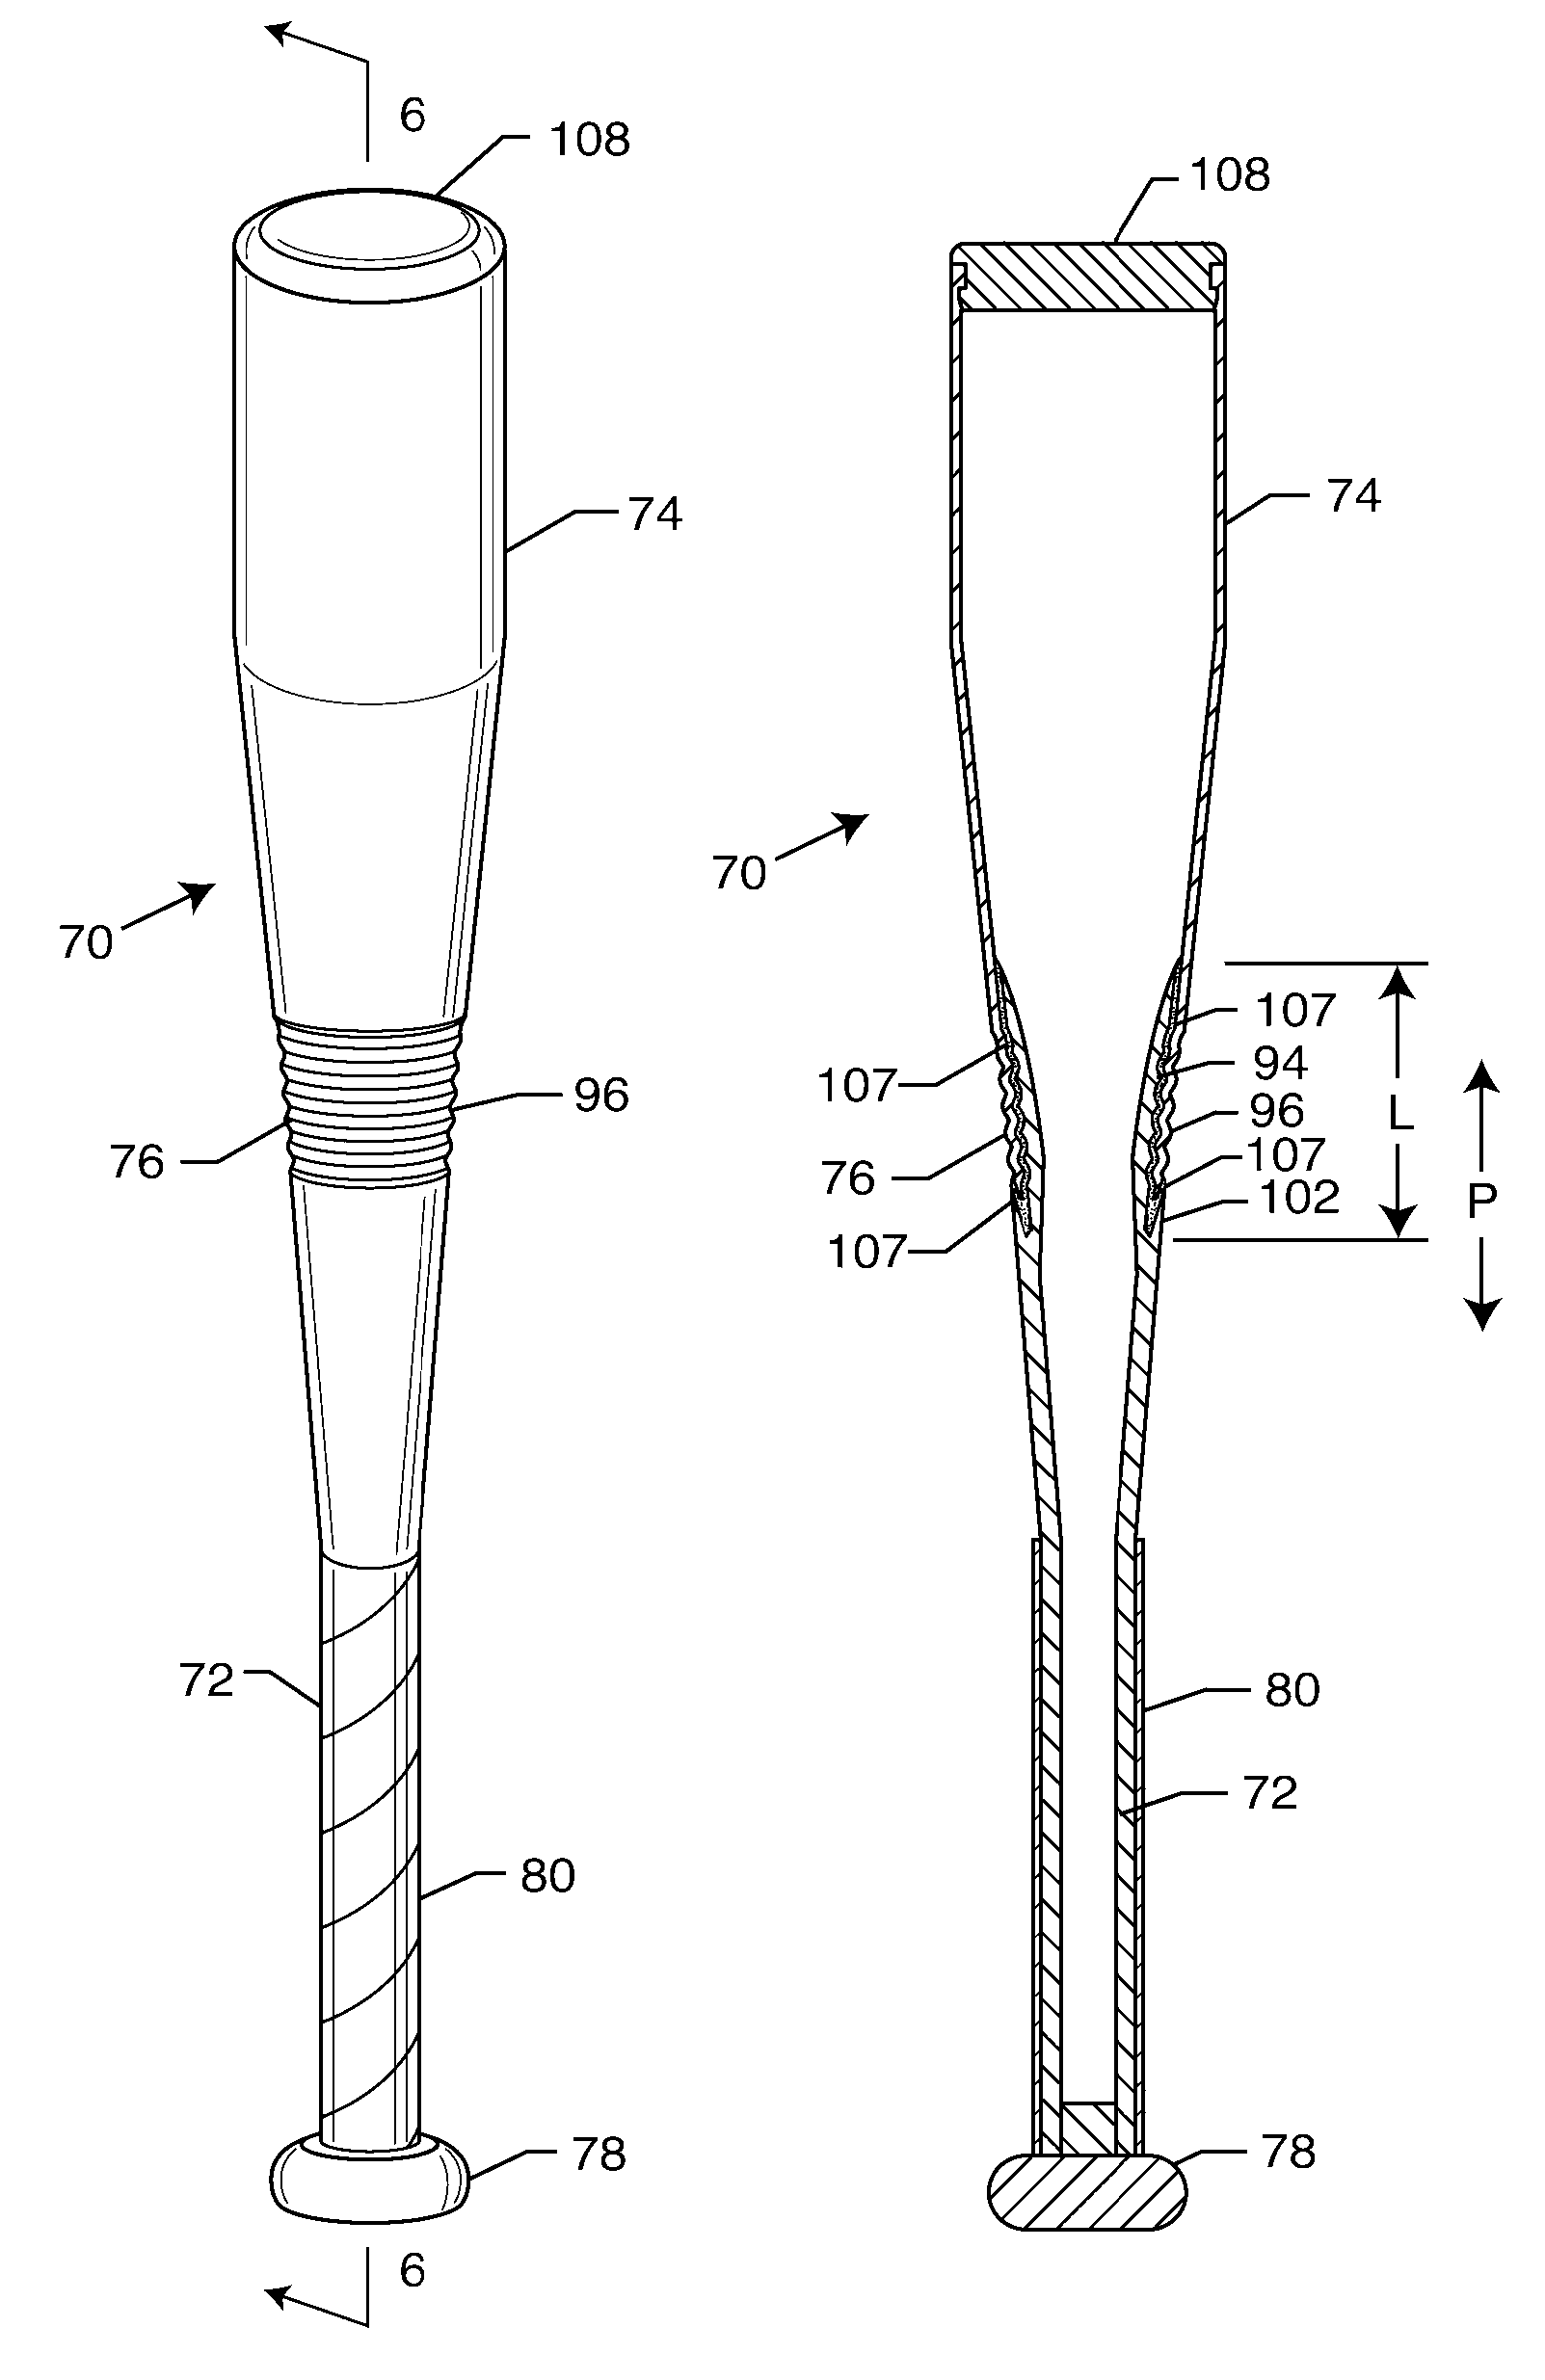 Multi-component bat having threaded connection and assembly process